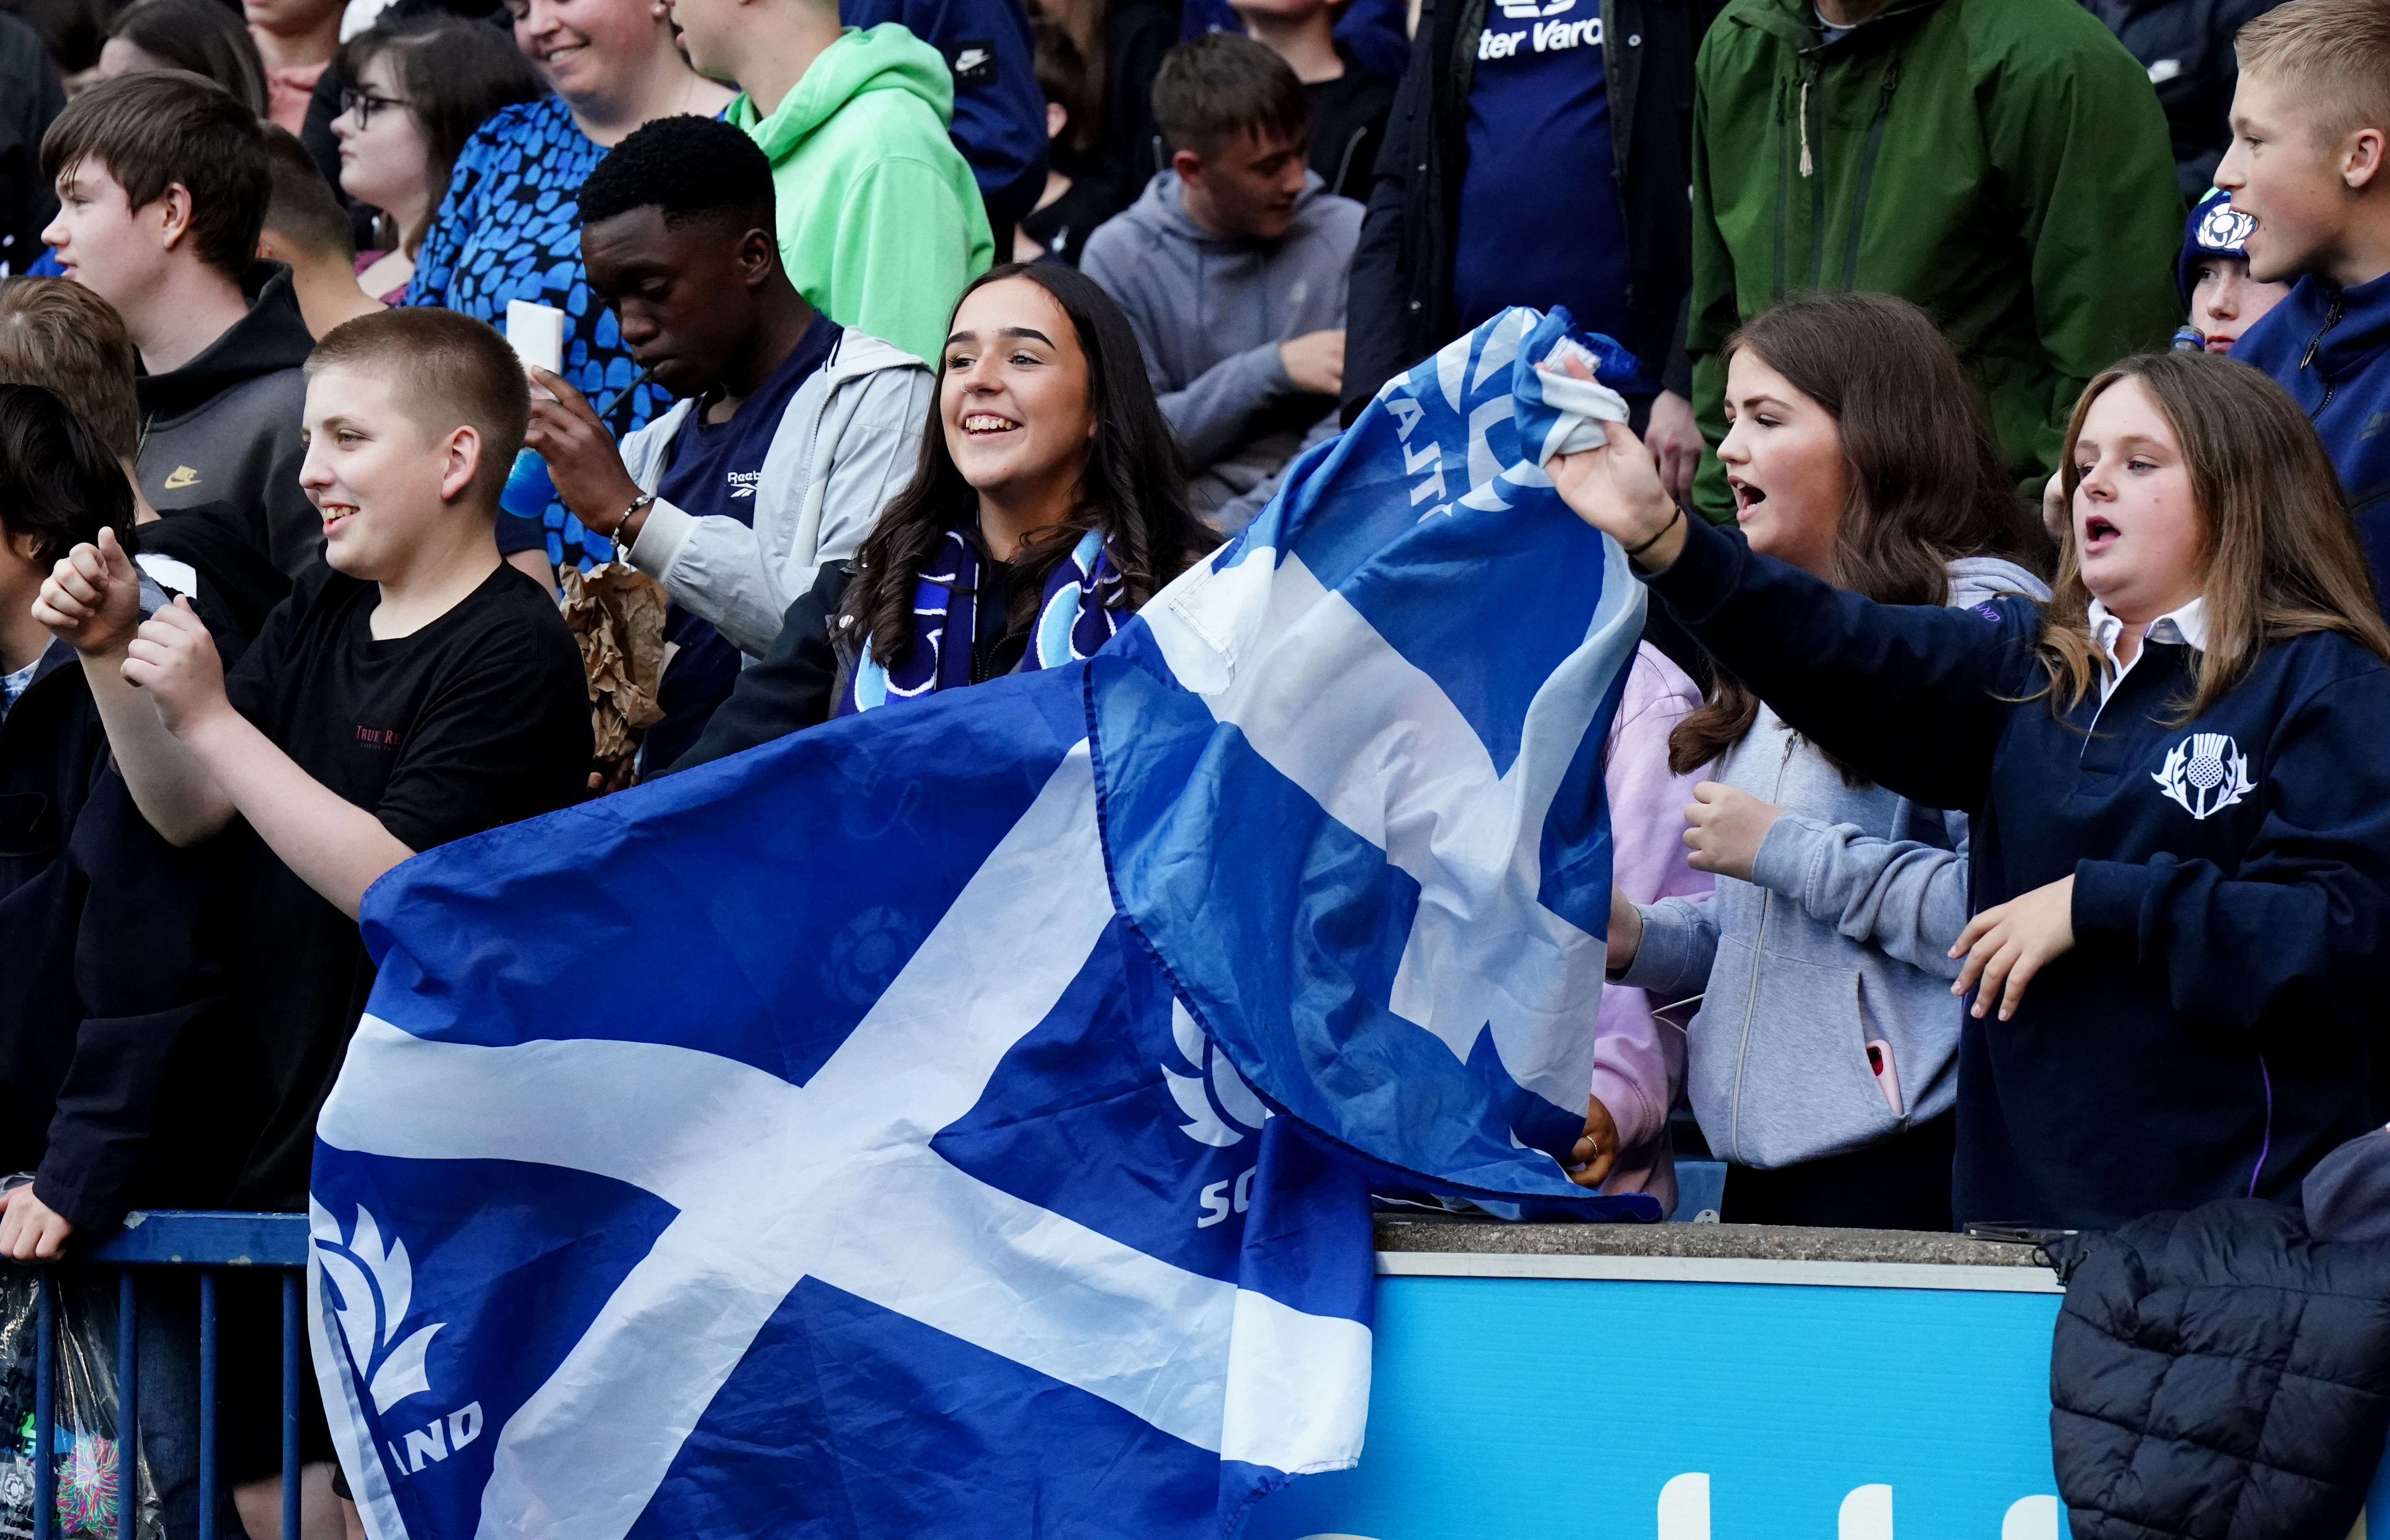 Scotland fans show their support during the warm-up match against Georgia